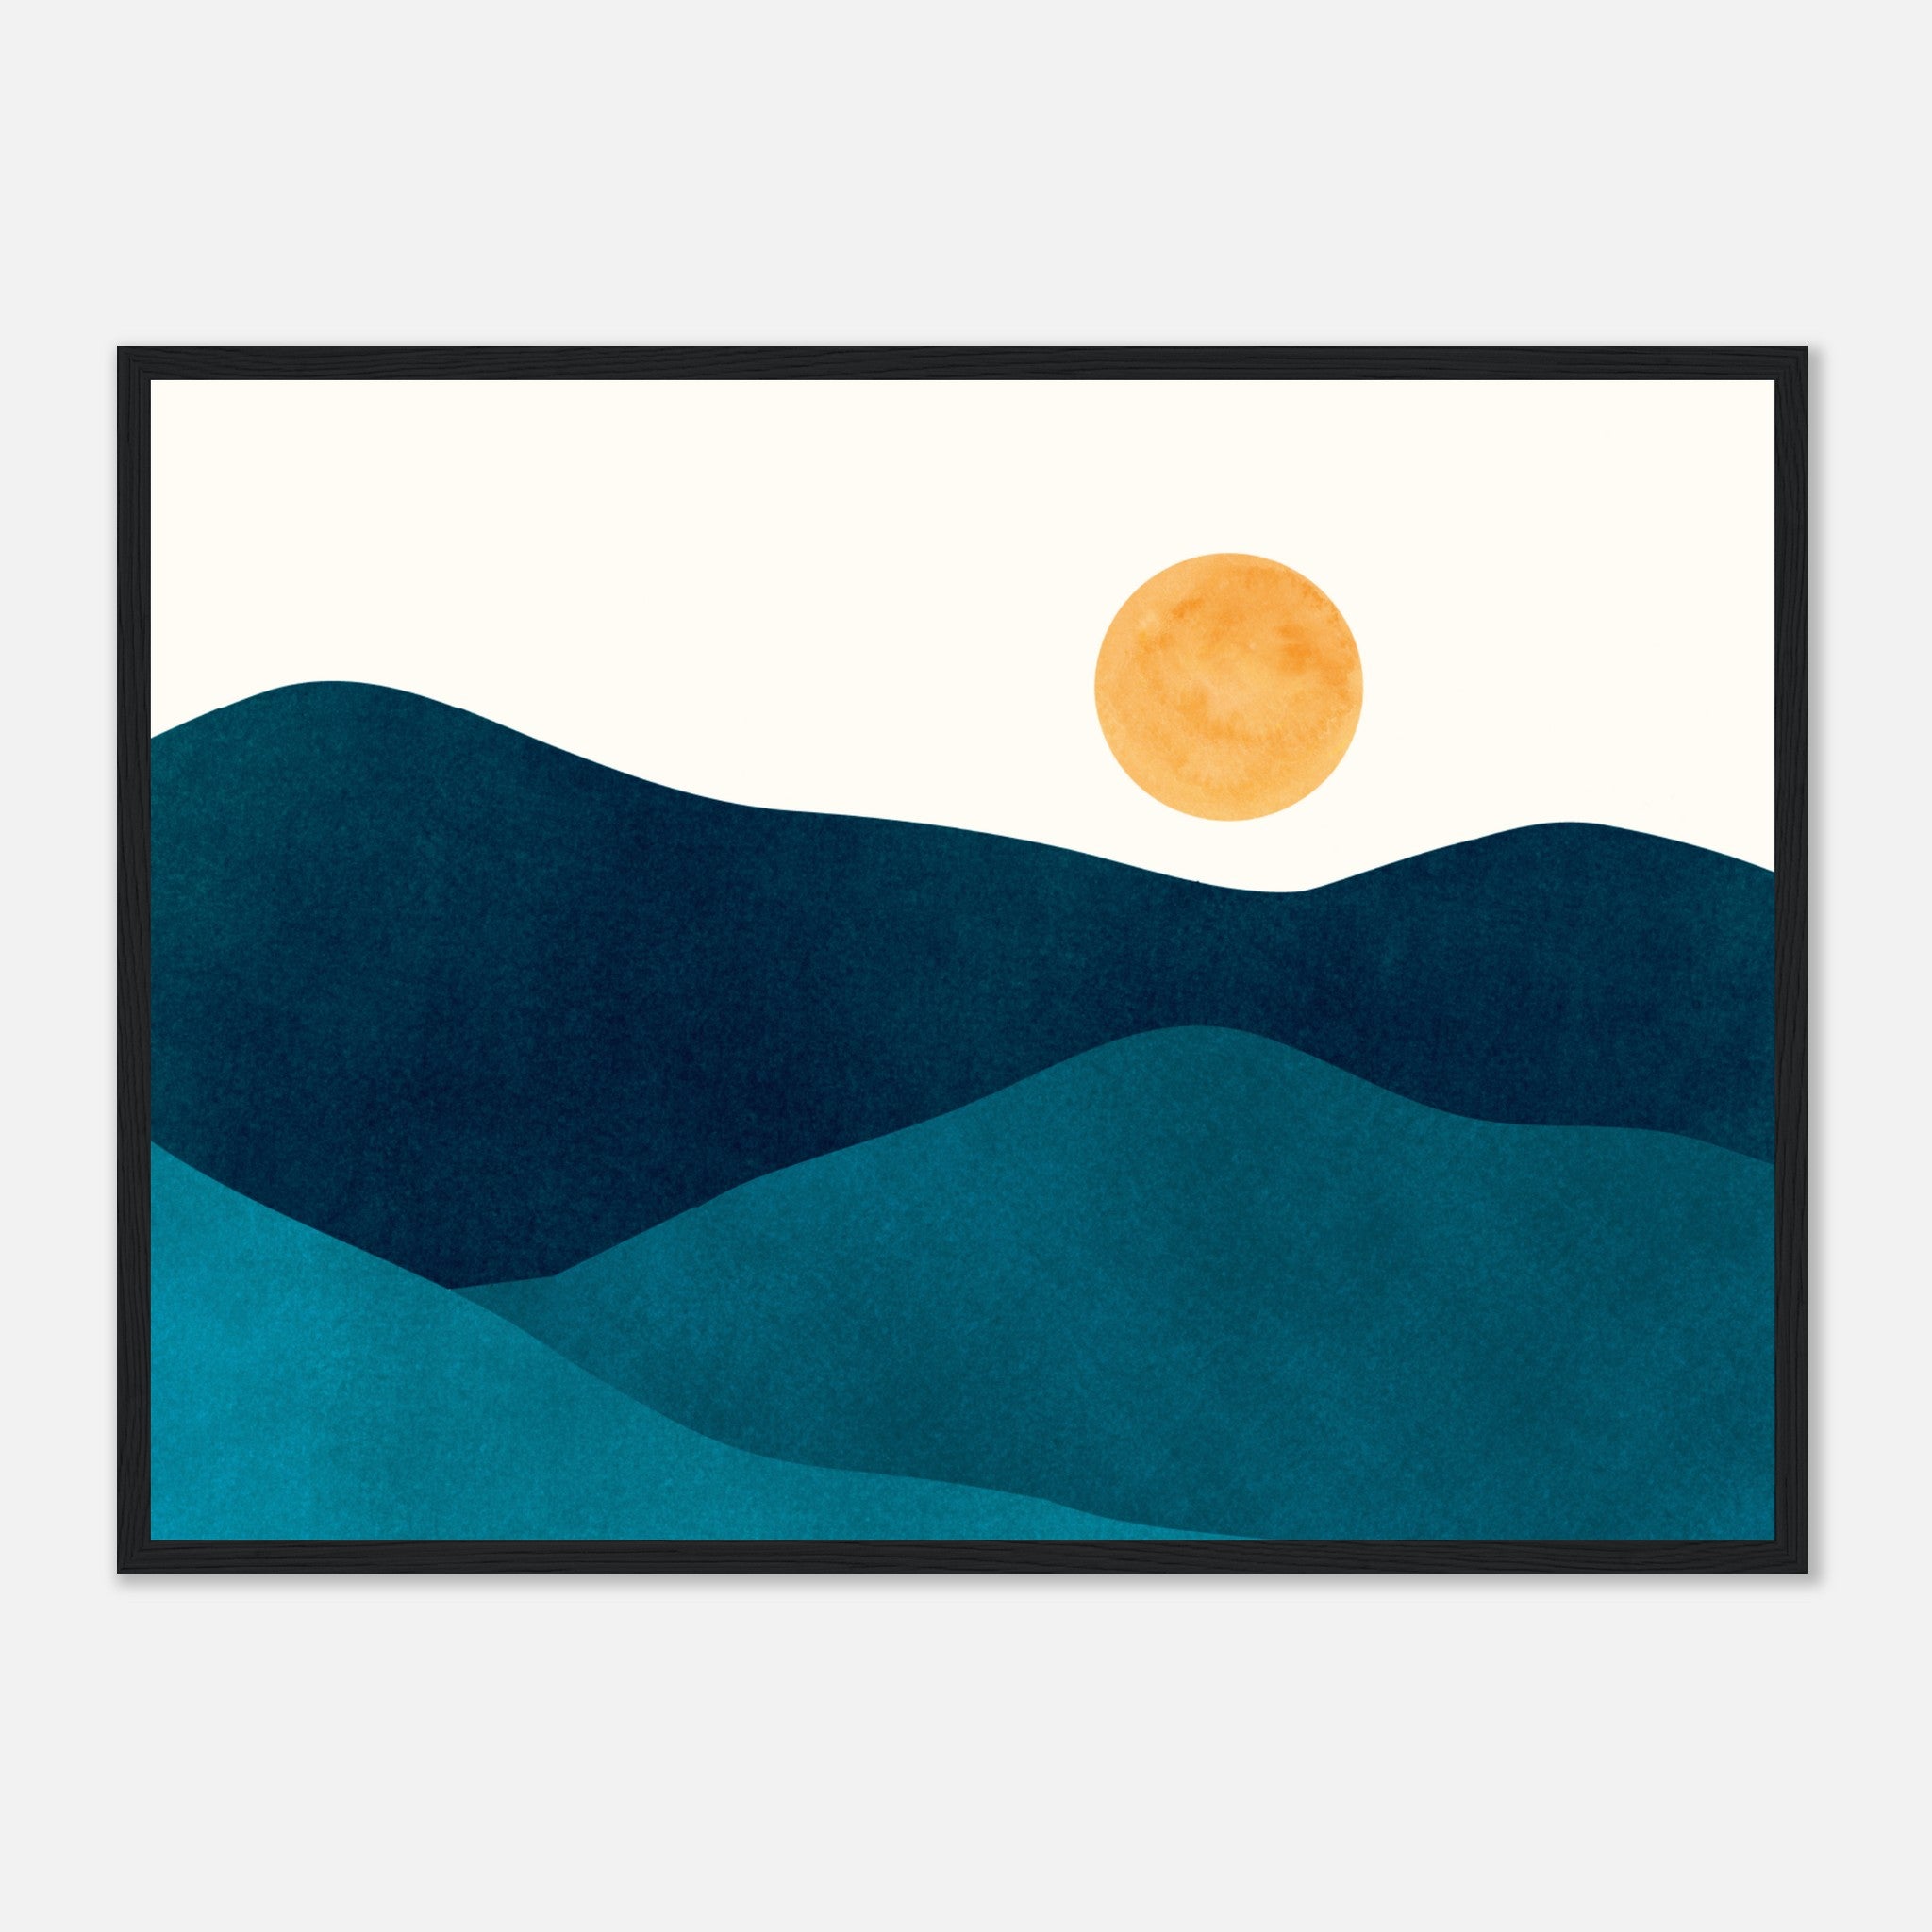 Teal Mountains Poster